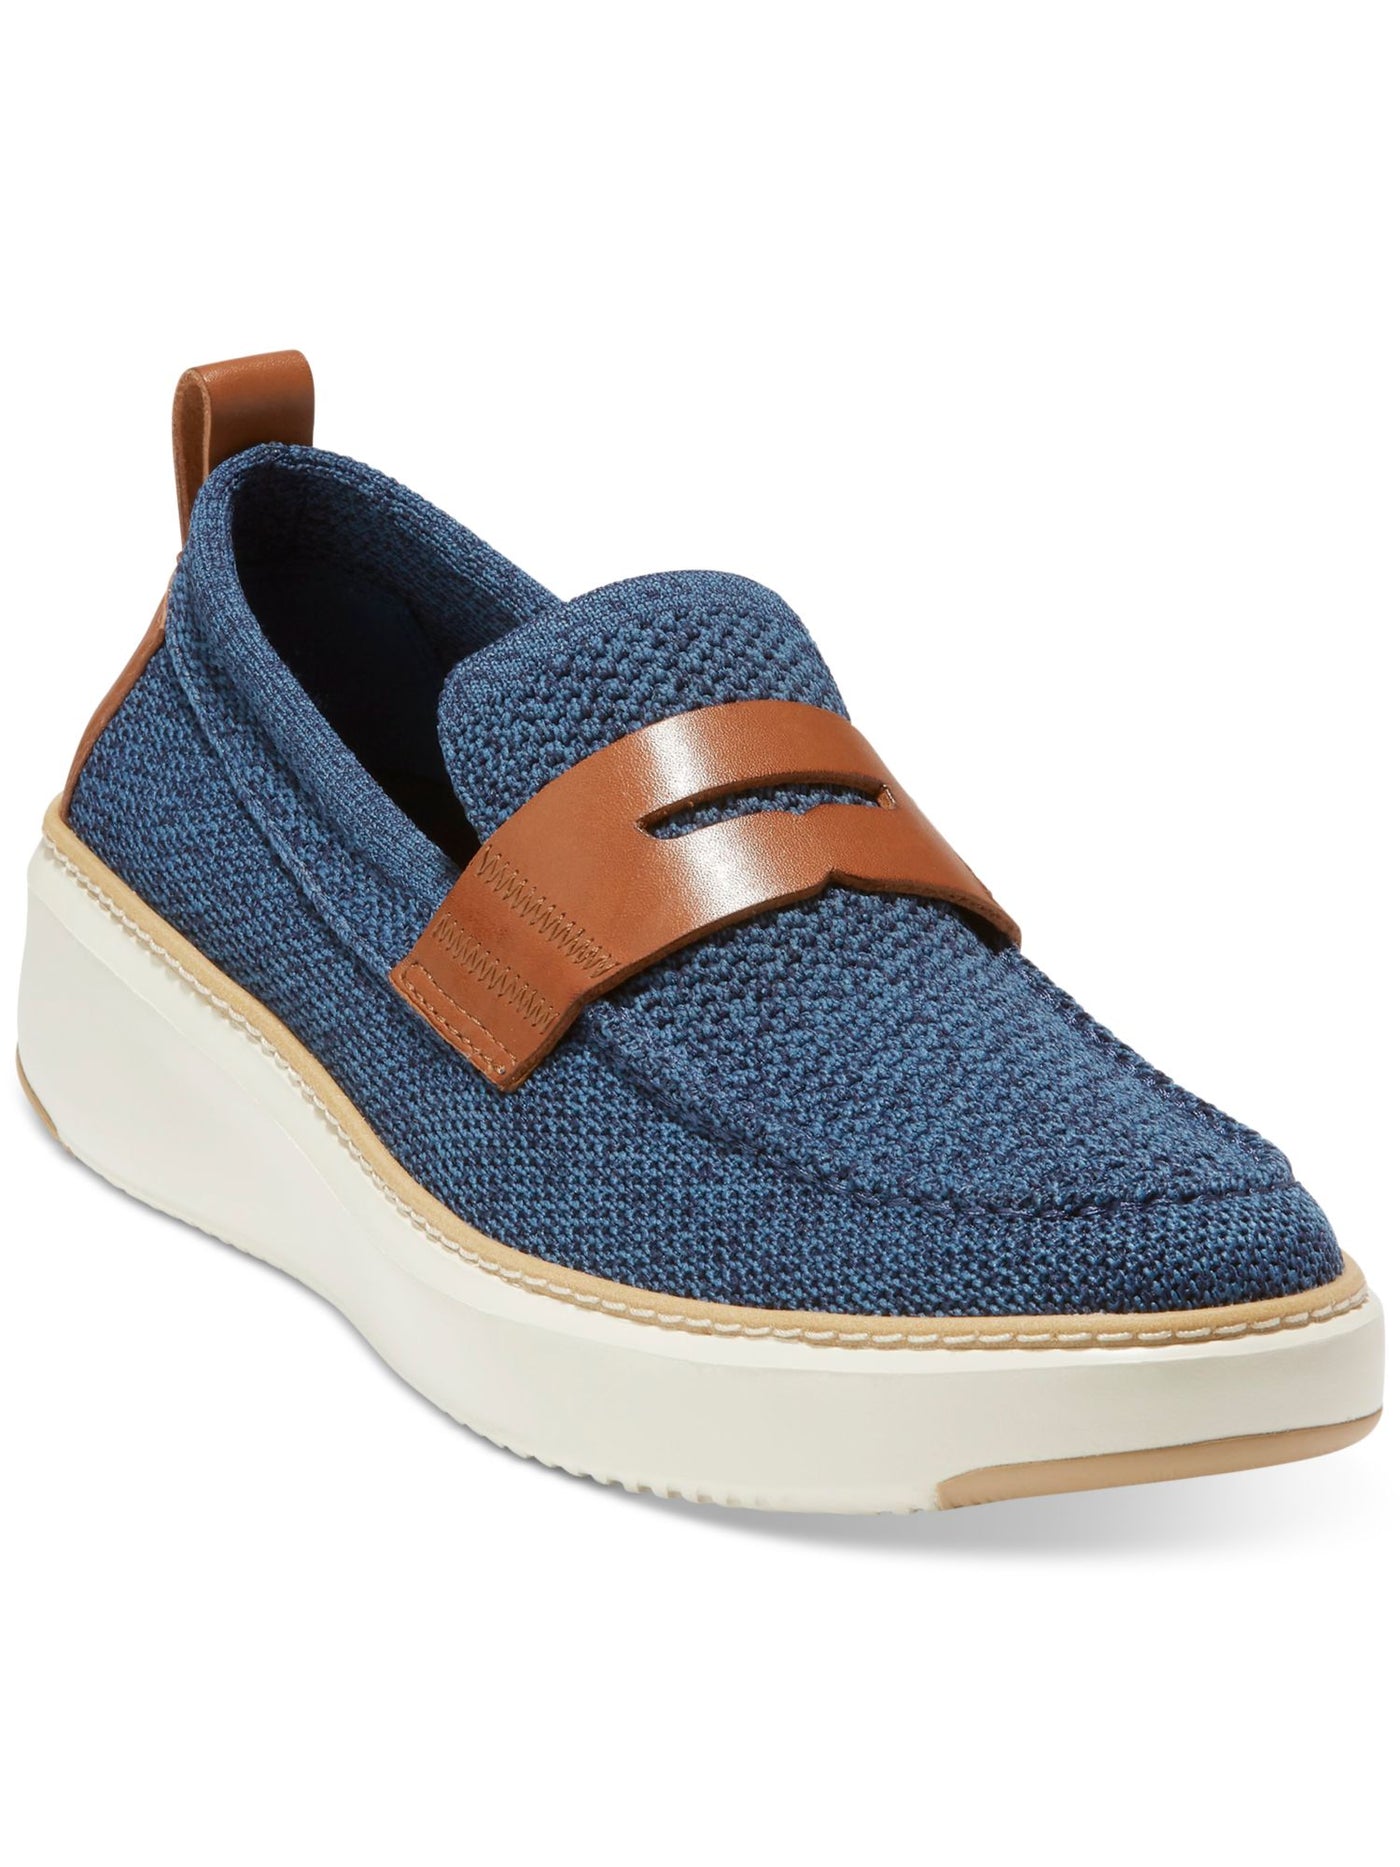 COLE HAAN GRANDSERIES Mens Blue Knit Contrast Penny Keeper Back Pull-Tab Cushioned Topspin Round Toe Wedge Slip On Loafers Shoes 13 M